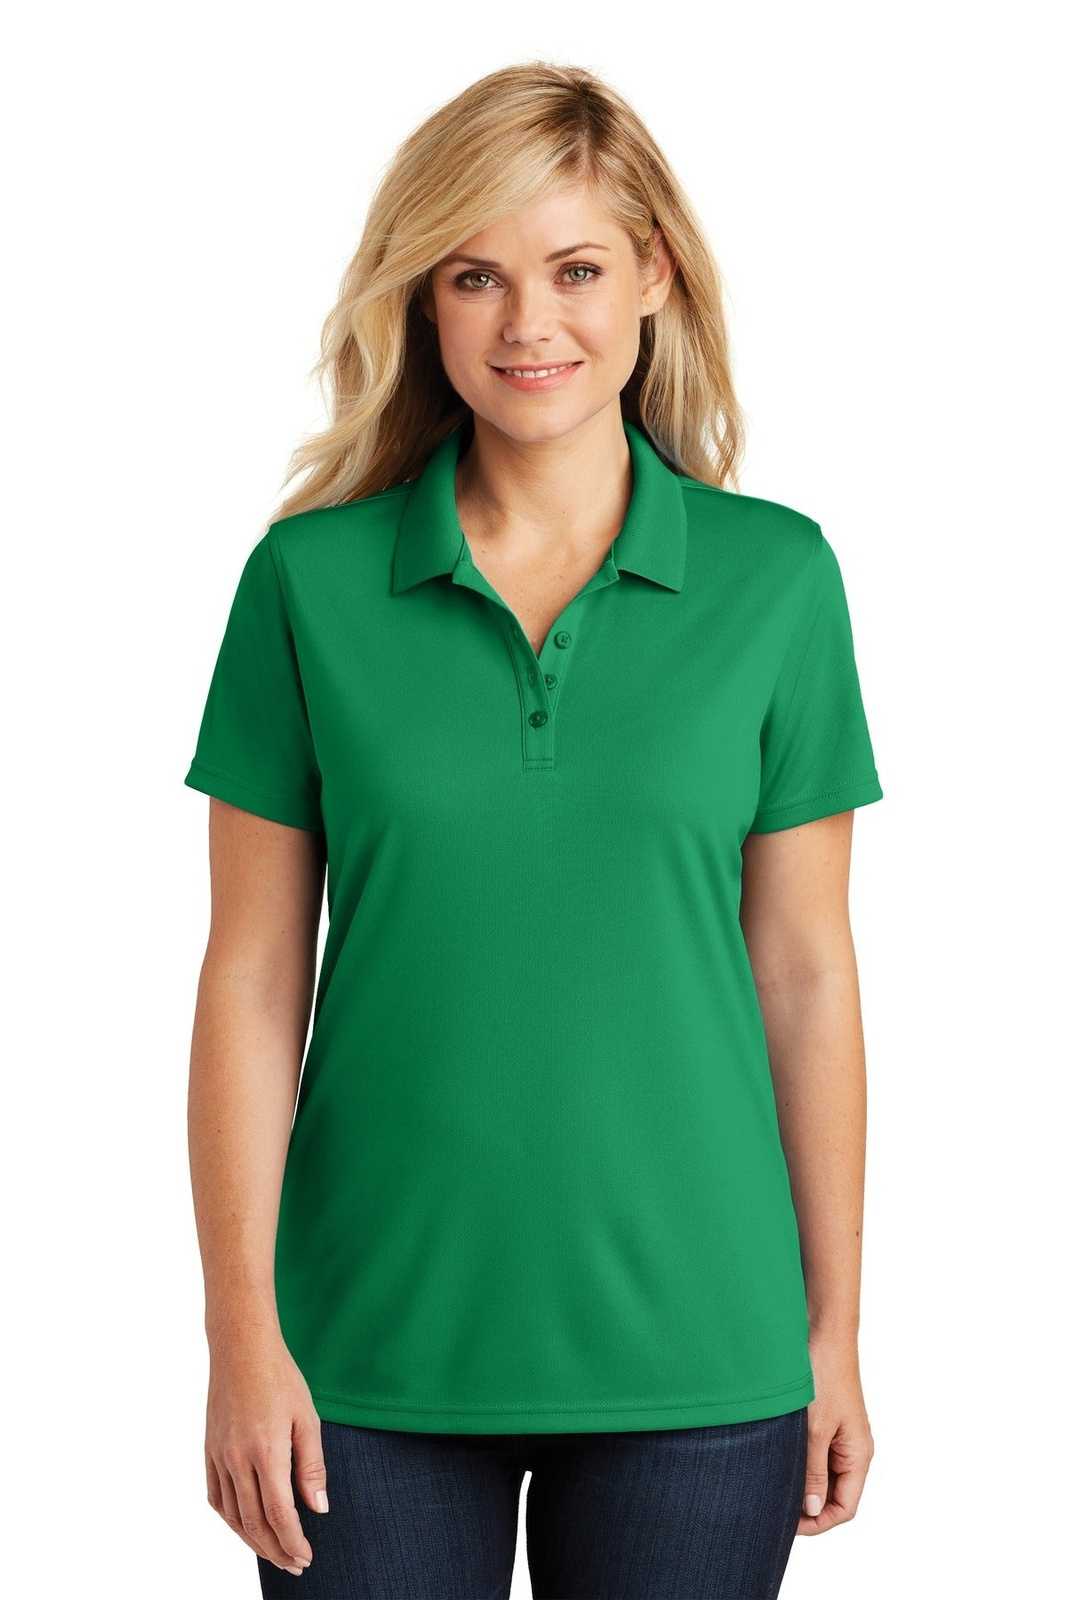 Port Authority LK110 Ladies Dry Zone UV Micro-Mesh Polo - Bright Kelly Green - HIT a Double - 1